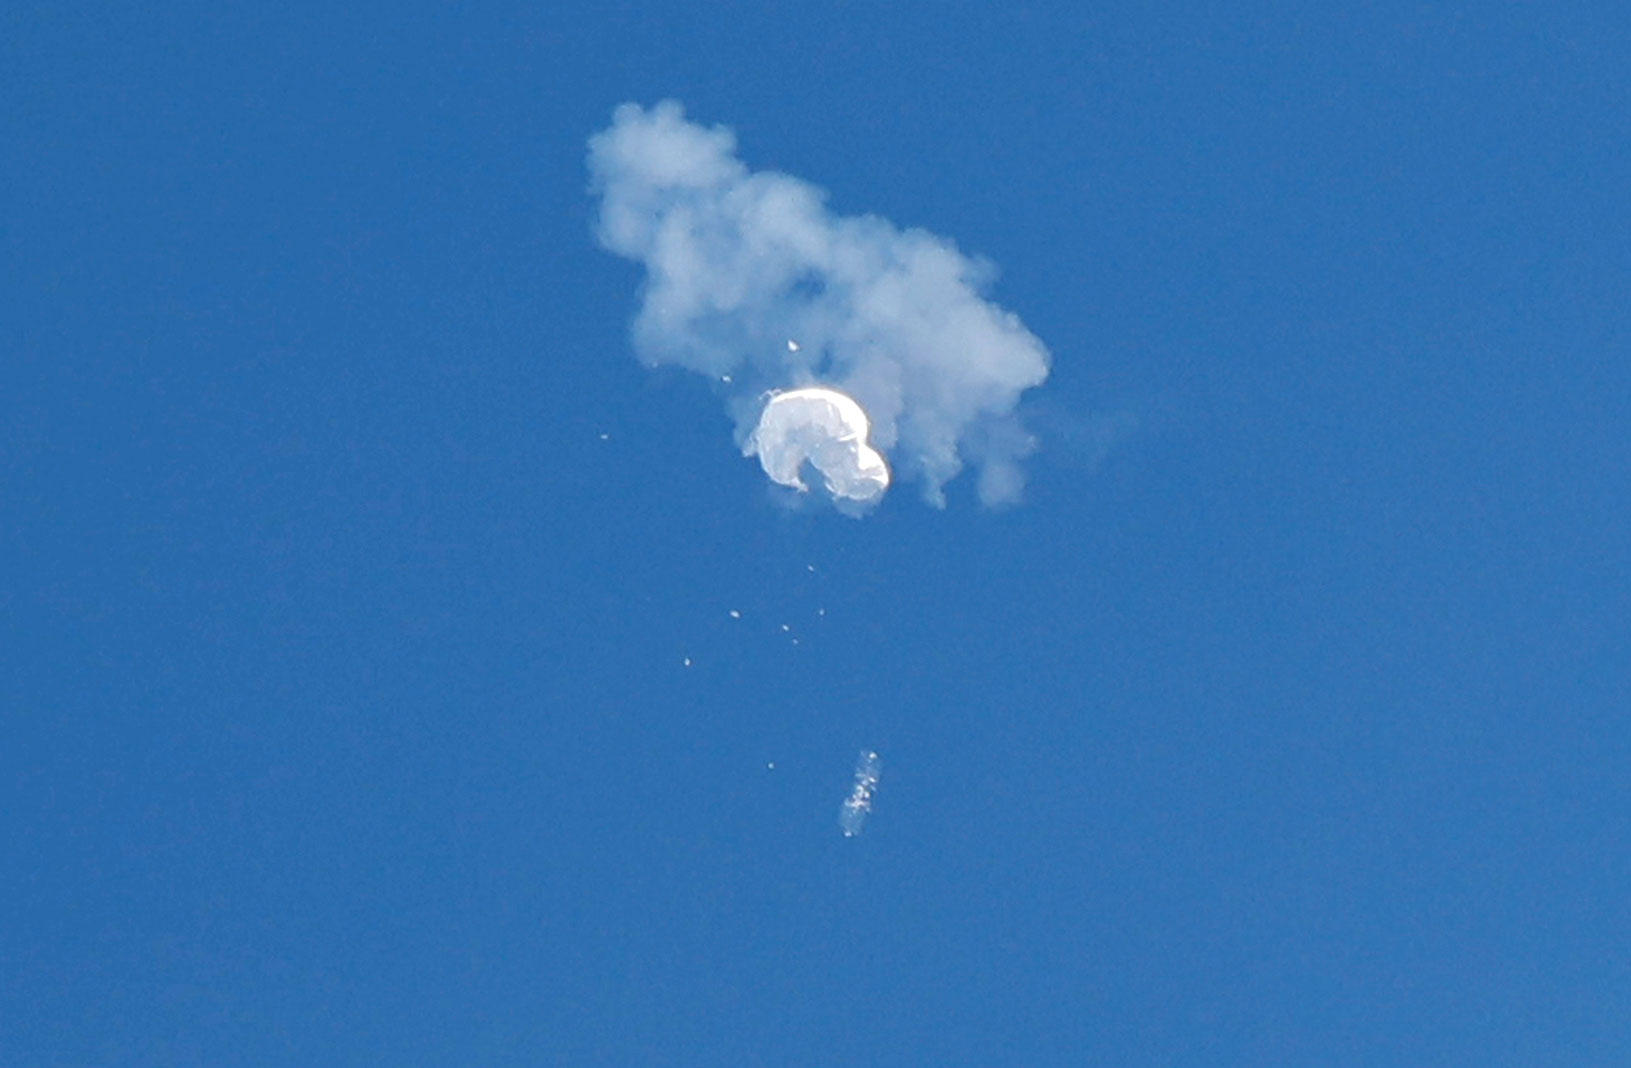 The suspected Chinese spy balloon falls to the ocean after being shot down Saturday, February 4.